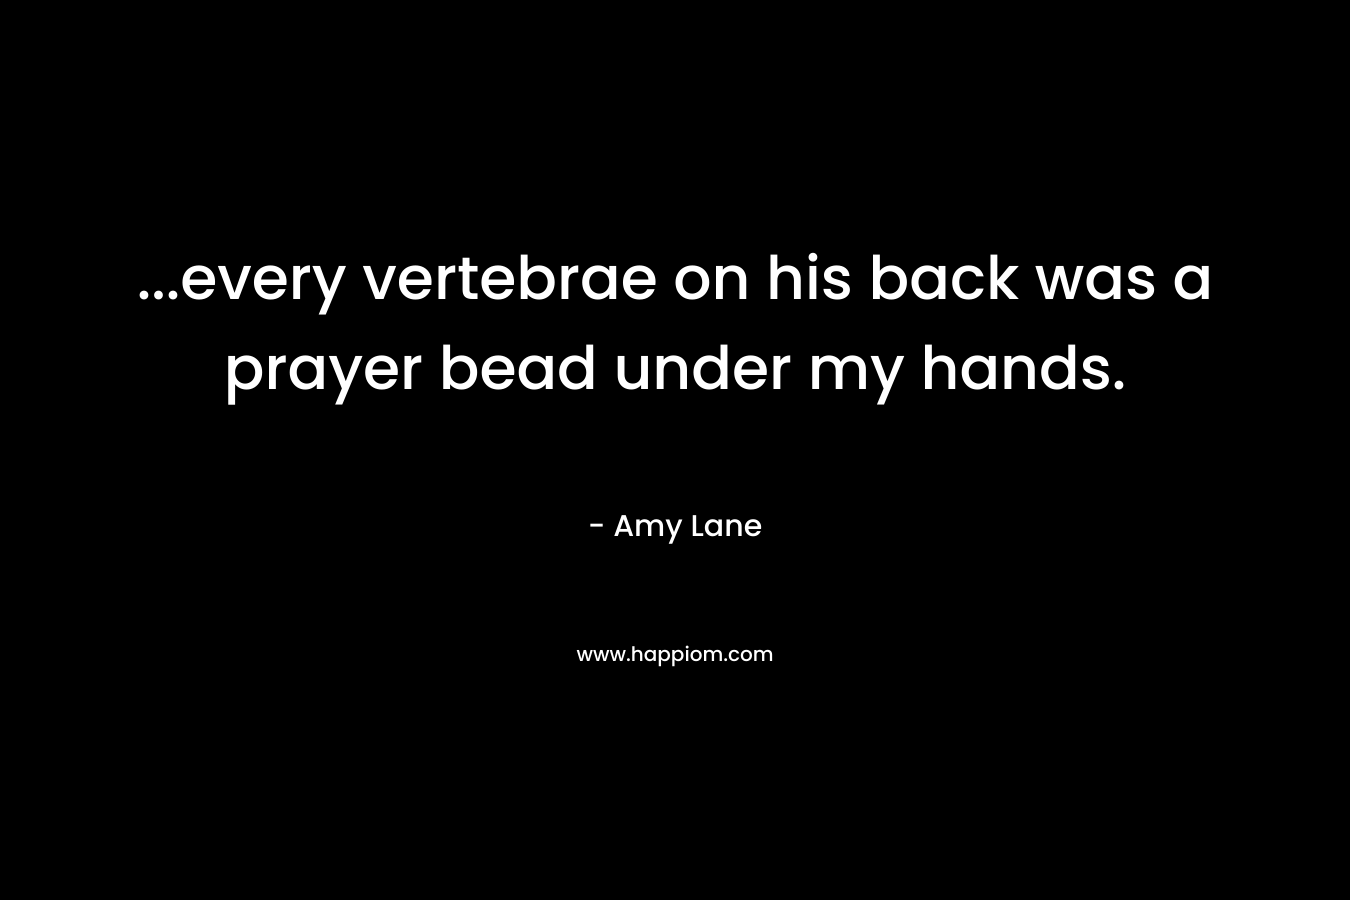 …every vertebrae on his back was a prayer bead under my hands. – Amy Lane